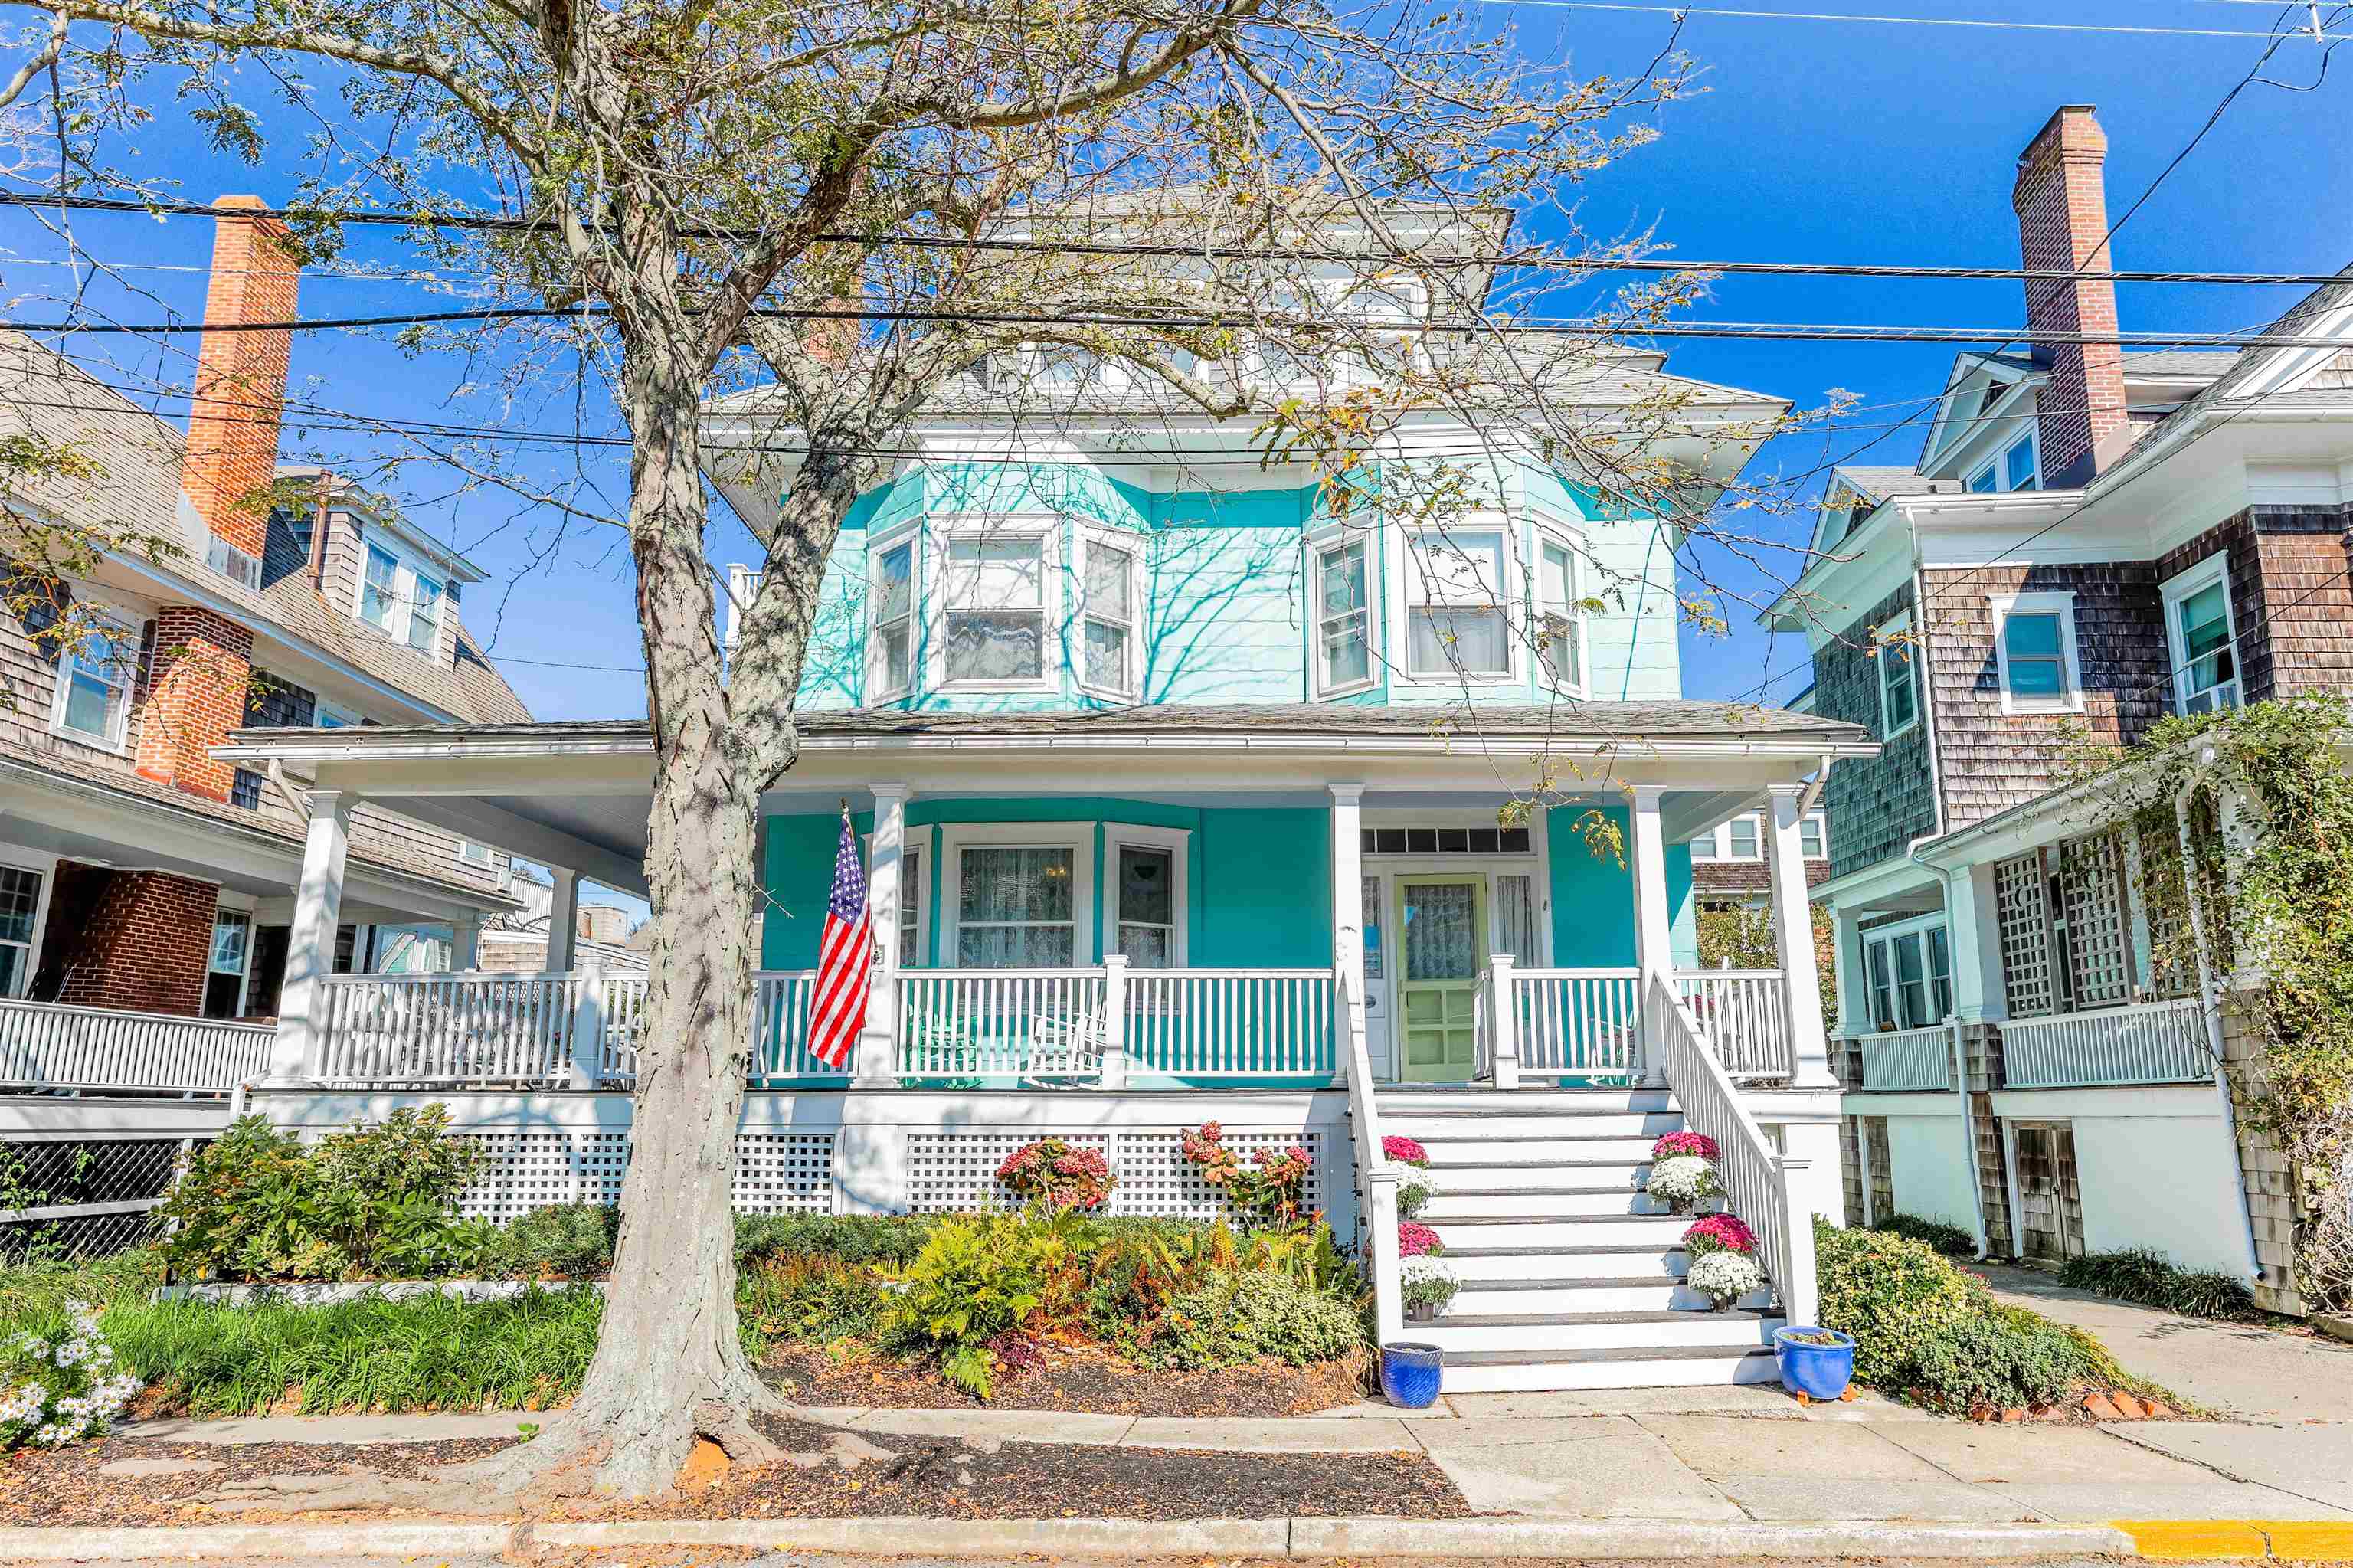 Introducing a spectacular Cape May gem nestled just one block away from the pristine Queen Street Beach, this three-story coastal retreat on Stockton Avenue is the epitome of grandeur and flexibility. Boasting a total of 8 bedrooms, 3.5 baths, and a convenient one-car detached garage, this historic beauty, built in 1905, beckons with its timeless charm and impressive features. This property is currently operated as a duplex. As you approach, you'll be captivated by the allure of the expansive wrap-around porch, a perfect spot to enjoy the sea breeze or watch the world go by. Stepping inside, the first floor welcomes you with a stately living room featuring a cozy fireplace, an inviting dining room with ample space to comfortably seat 12, and a charming kitchen that's ideal for whipping up coastal-inspired meals. Additionally, the first floor offers a full bath, a bedroom, and a convenient half bath with an exterior entrance, making it an ideal space for accommodating guests or family members. The second floor unfolds with five additional well-appointed bedrooms, creating a haven for rest and relaxation after a day spent at the beach. A full bath on this floor ensures convenience and comfort for everyone. For even more versatility, the third floor is set up as a self-contained apartment, featuring a fully-equipped kitchen, a cozy living room, two bedrooms, and a full bath. This unique layout allows for independent living arrangements, making it perfect for multi-generational families or those seeking a rental income opportunity. This remarkable property boasts a lucrative rental history, presenting an irresistible investment prospect. You have the flexibility to either rent one unit and relish the other for personal use or capitalize on the full-house rental potential. Furthermore, this property is a candidate for conversion into a single-family residence, subject to buyer obtaining necessary approvals.  Outside, a lush and inviting backyard offers the perfect setting for barbecues or post-beach relaxation. The driveway is thoughtfully designed for other uses, with the garage serving as a secure space for bikes and more. Situated in the highly desirable Stockton Avenue neighborhood, this extraordinary property is only a short stroll away from Cape May's charming downtown area, ensuring that you're never far from the town's vibrant culture and culinary delights. And with the beach just a block away, you'll have quick and easy access to the sun, sand, and surf that Cape May is famous for.